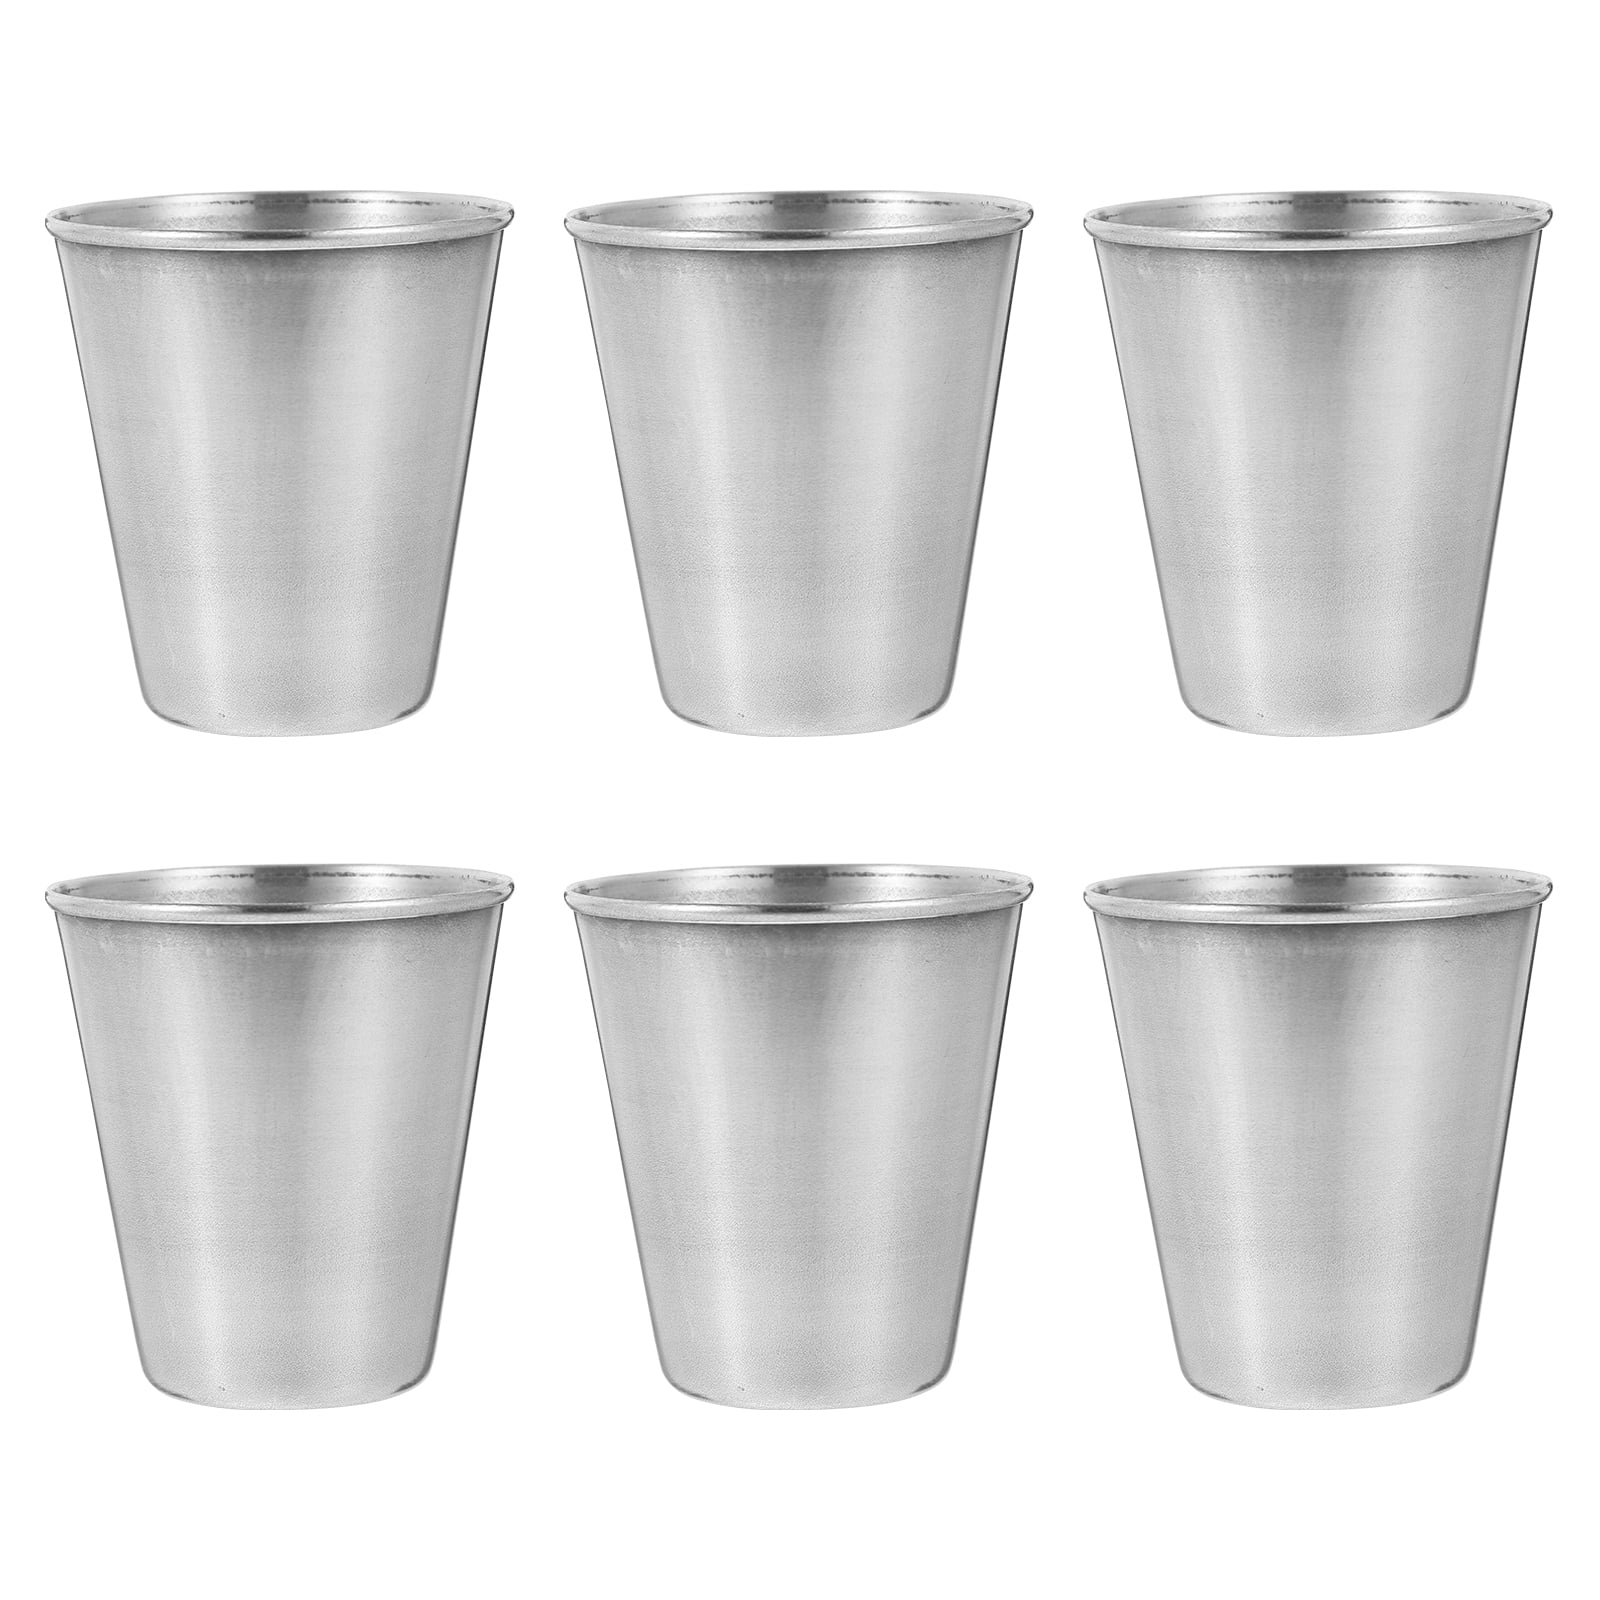 Wholesale Offer 25 x Silver Stainless Steel Single Shot Cups/Glasses... 